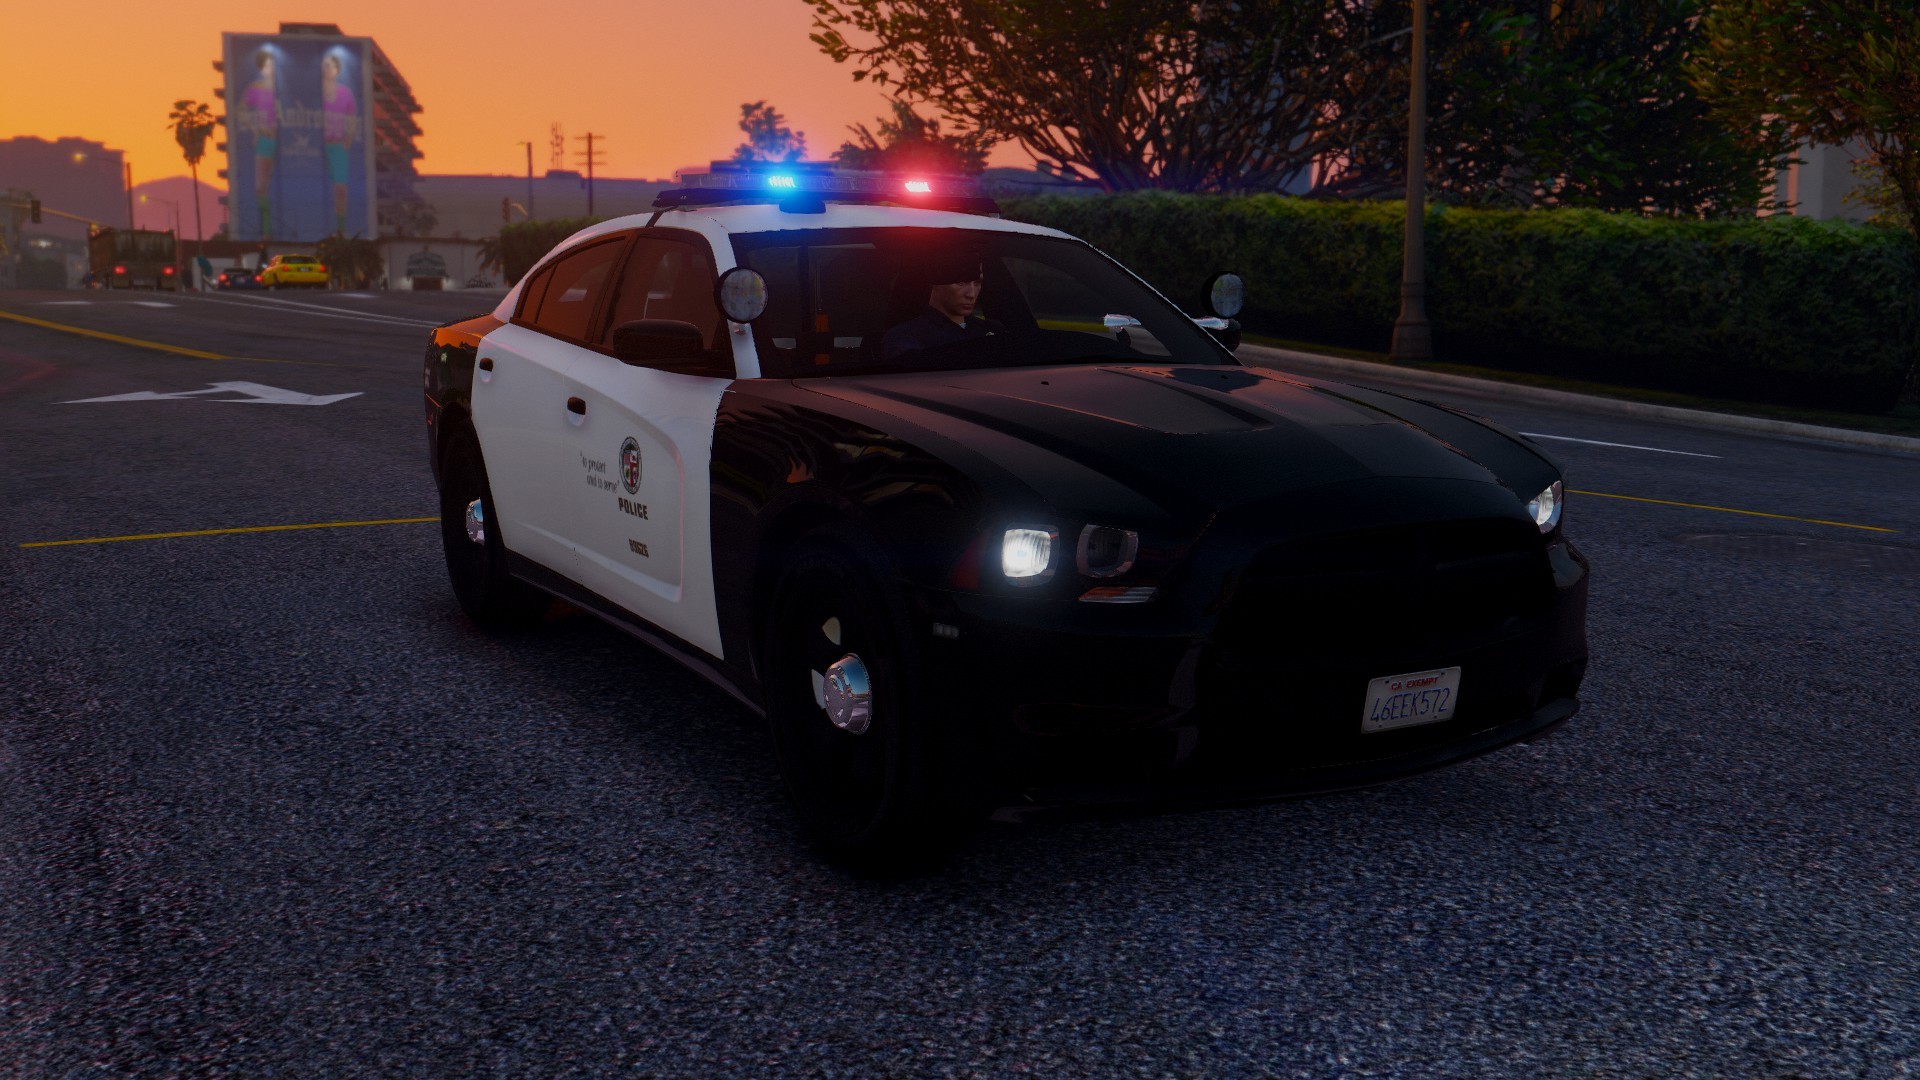 Lapd Wallpapers